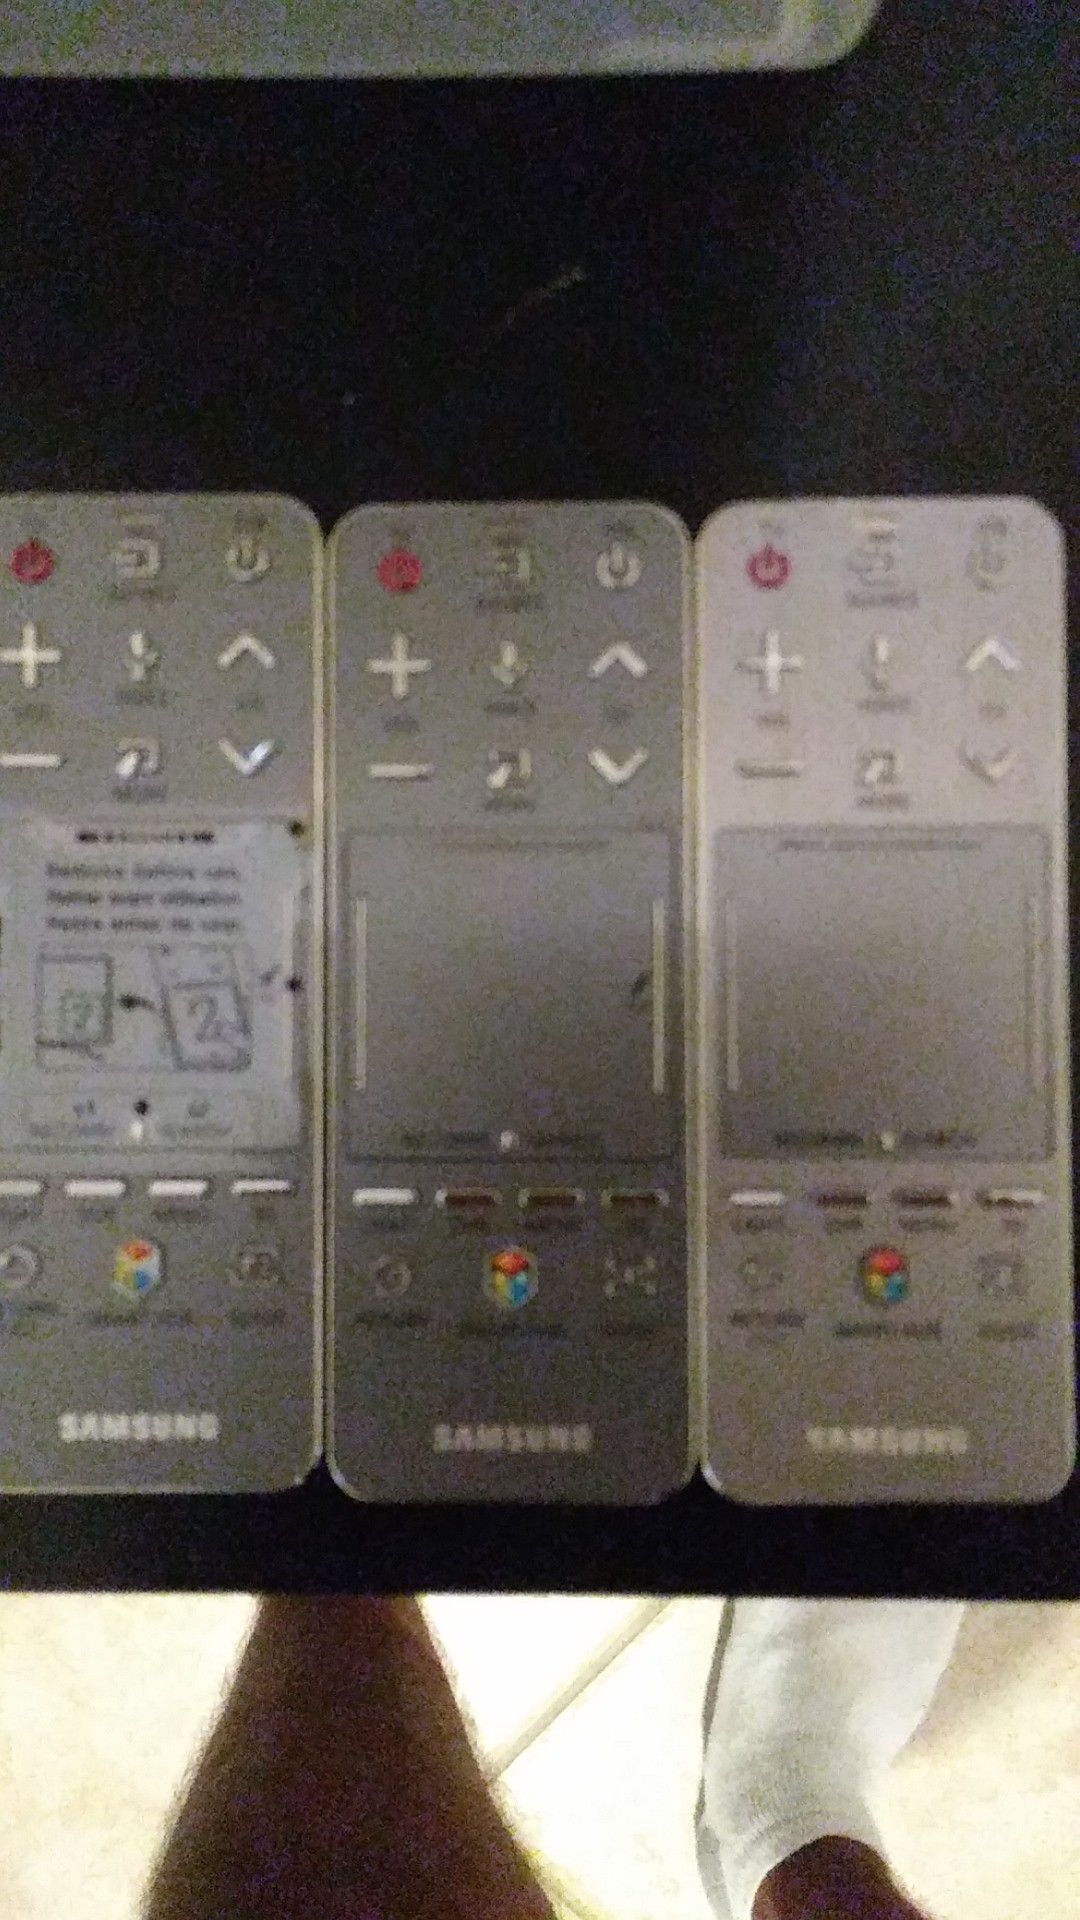 UHD TV SERIES 9 9000. REMOTE CONTROLS. SET OF 3....I HEAR OFFERS